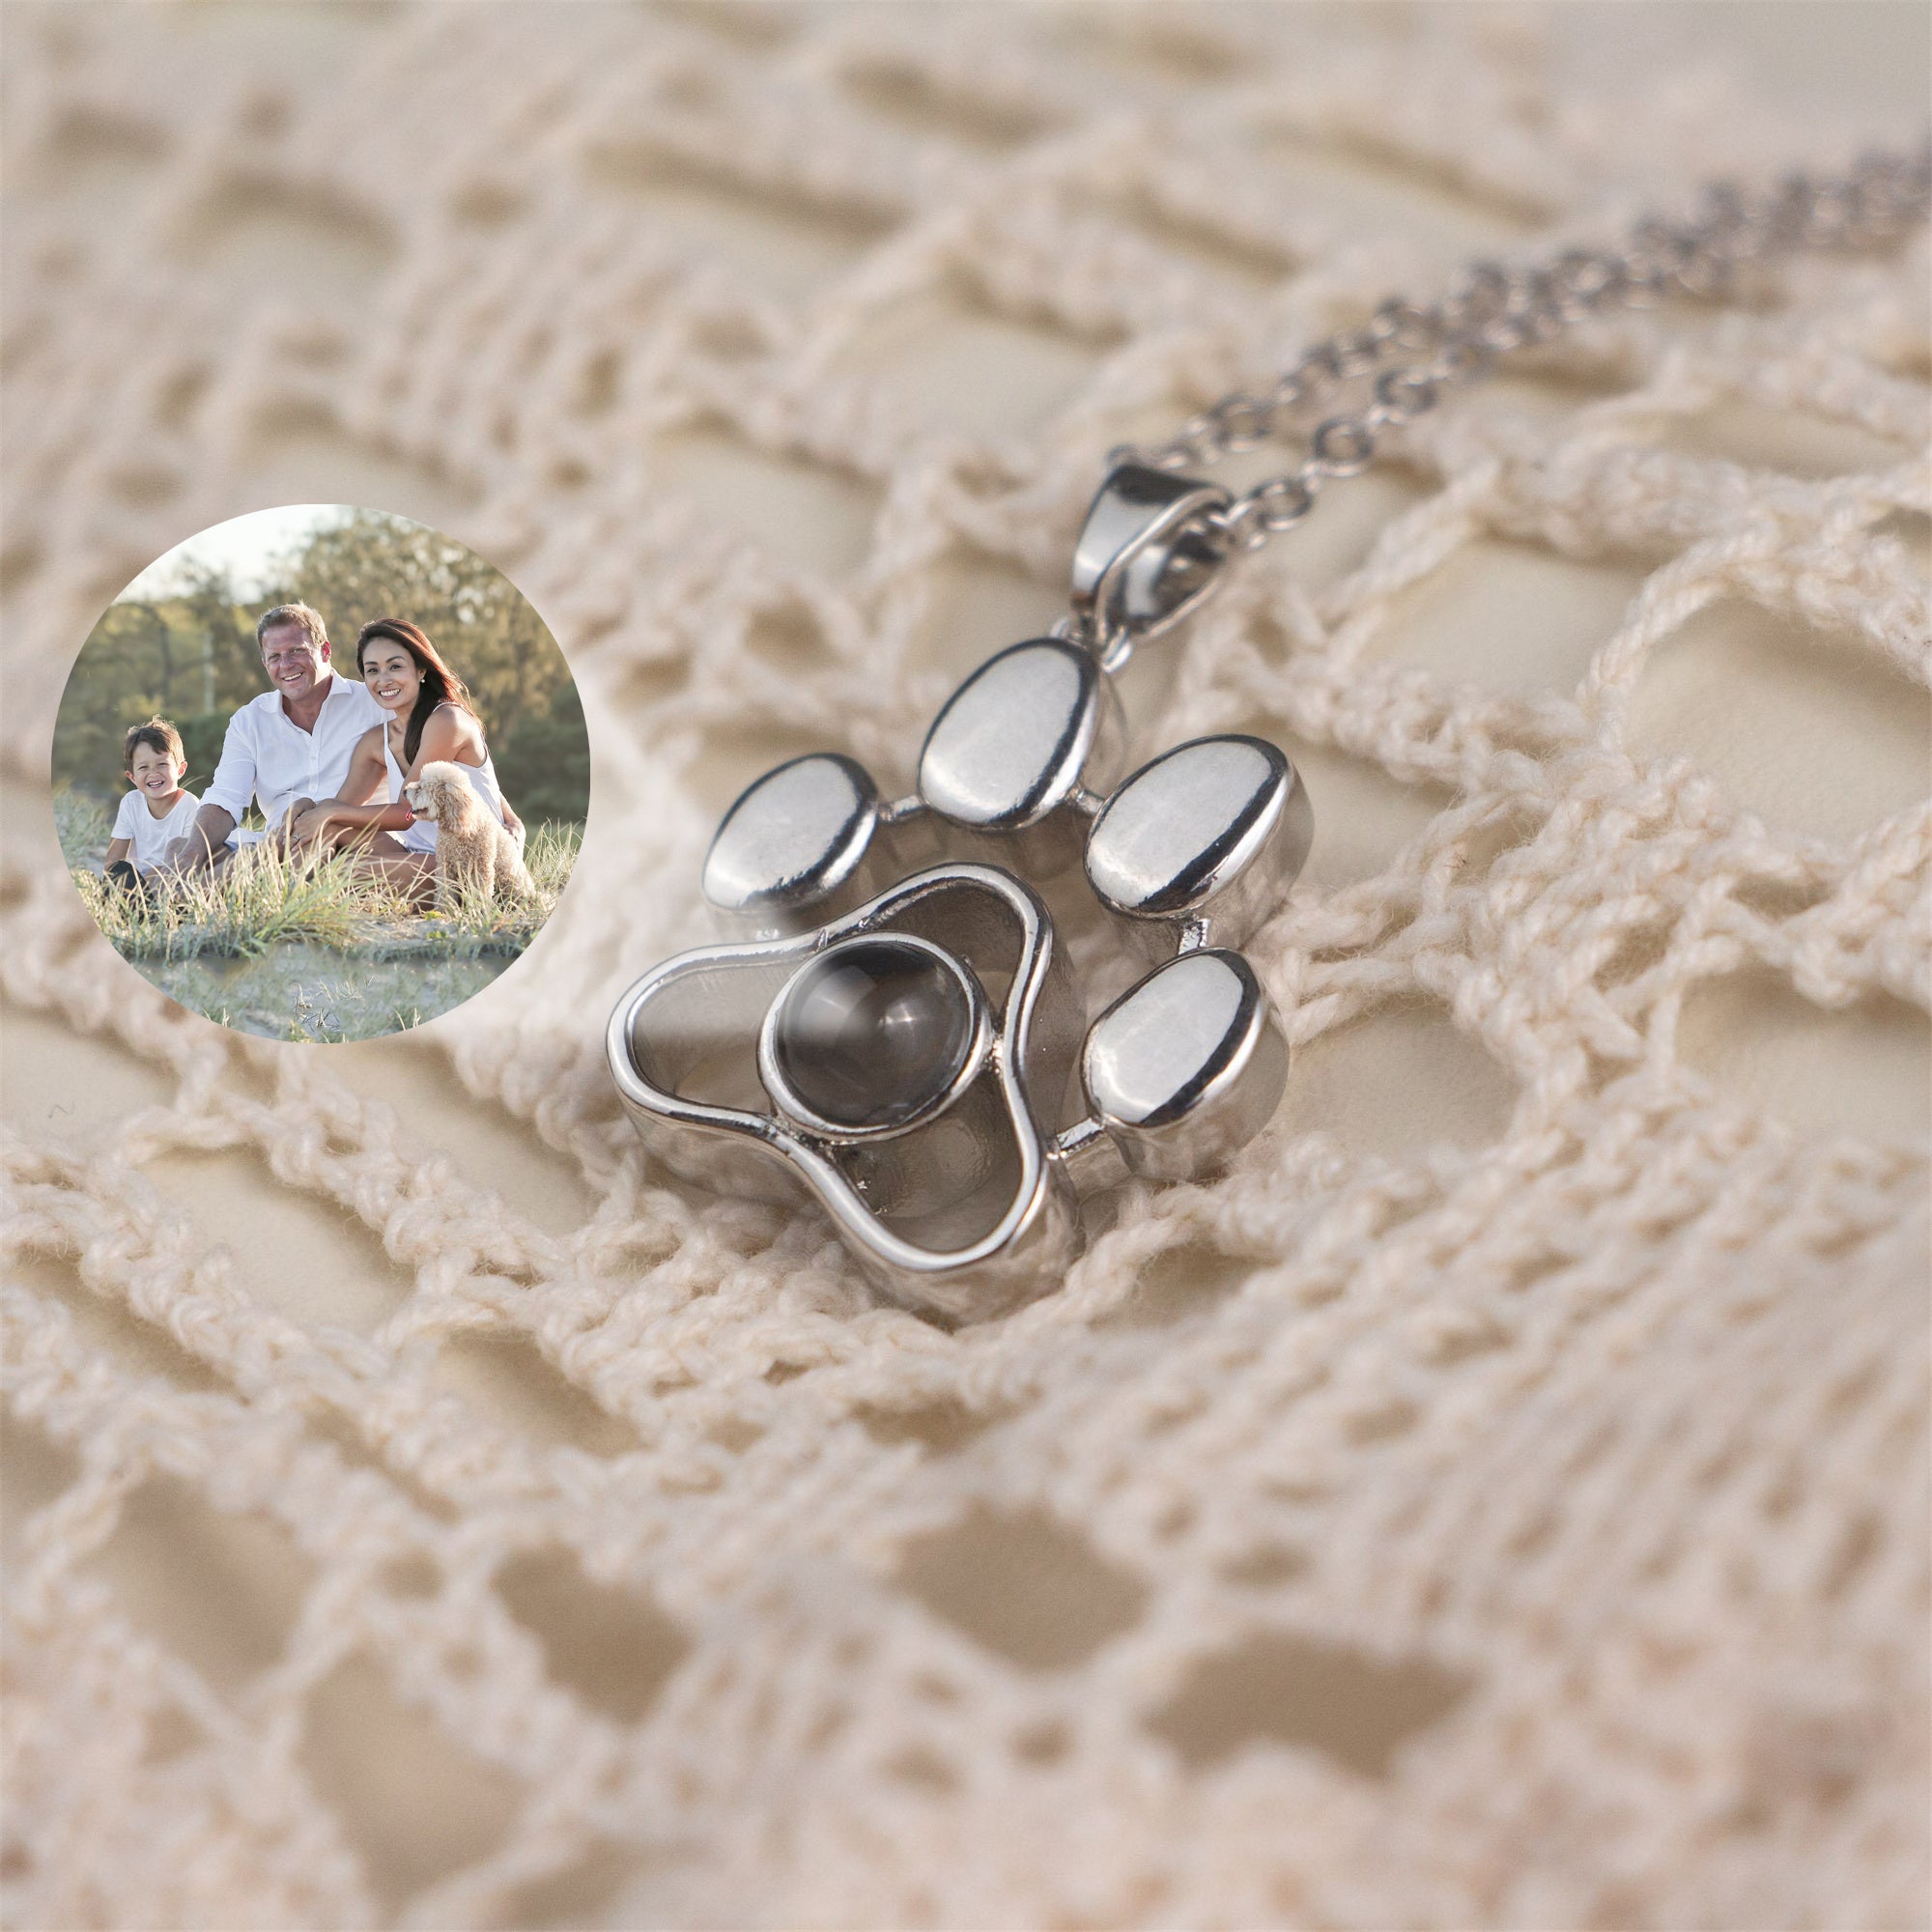 Custom Paw Print Projection Necklace, Family Couples Pet Photo Necklace